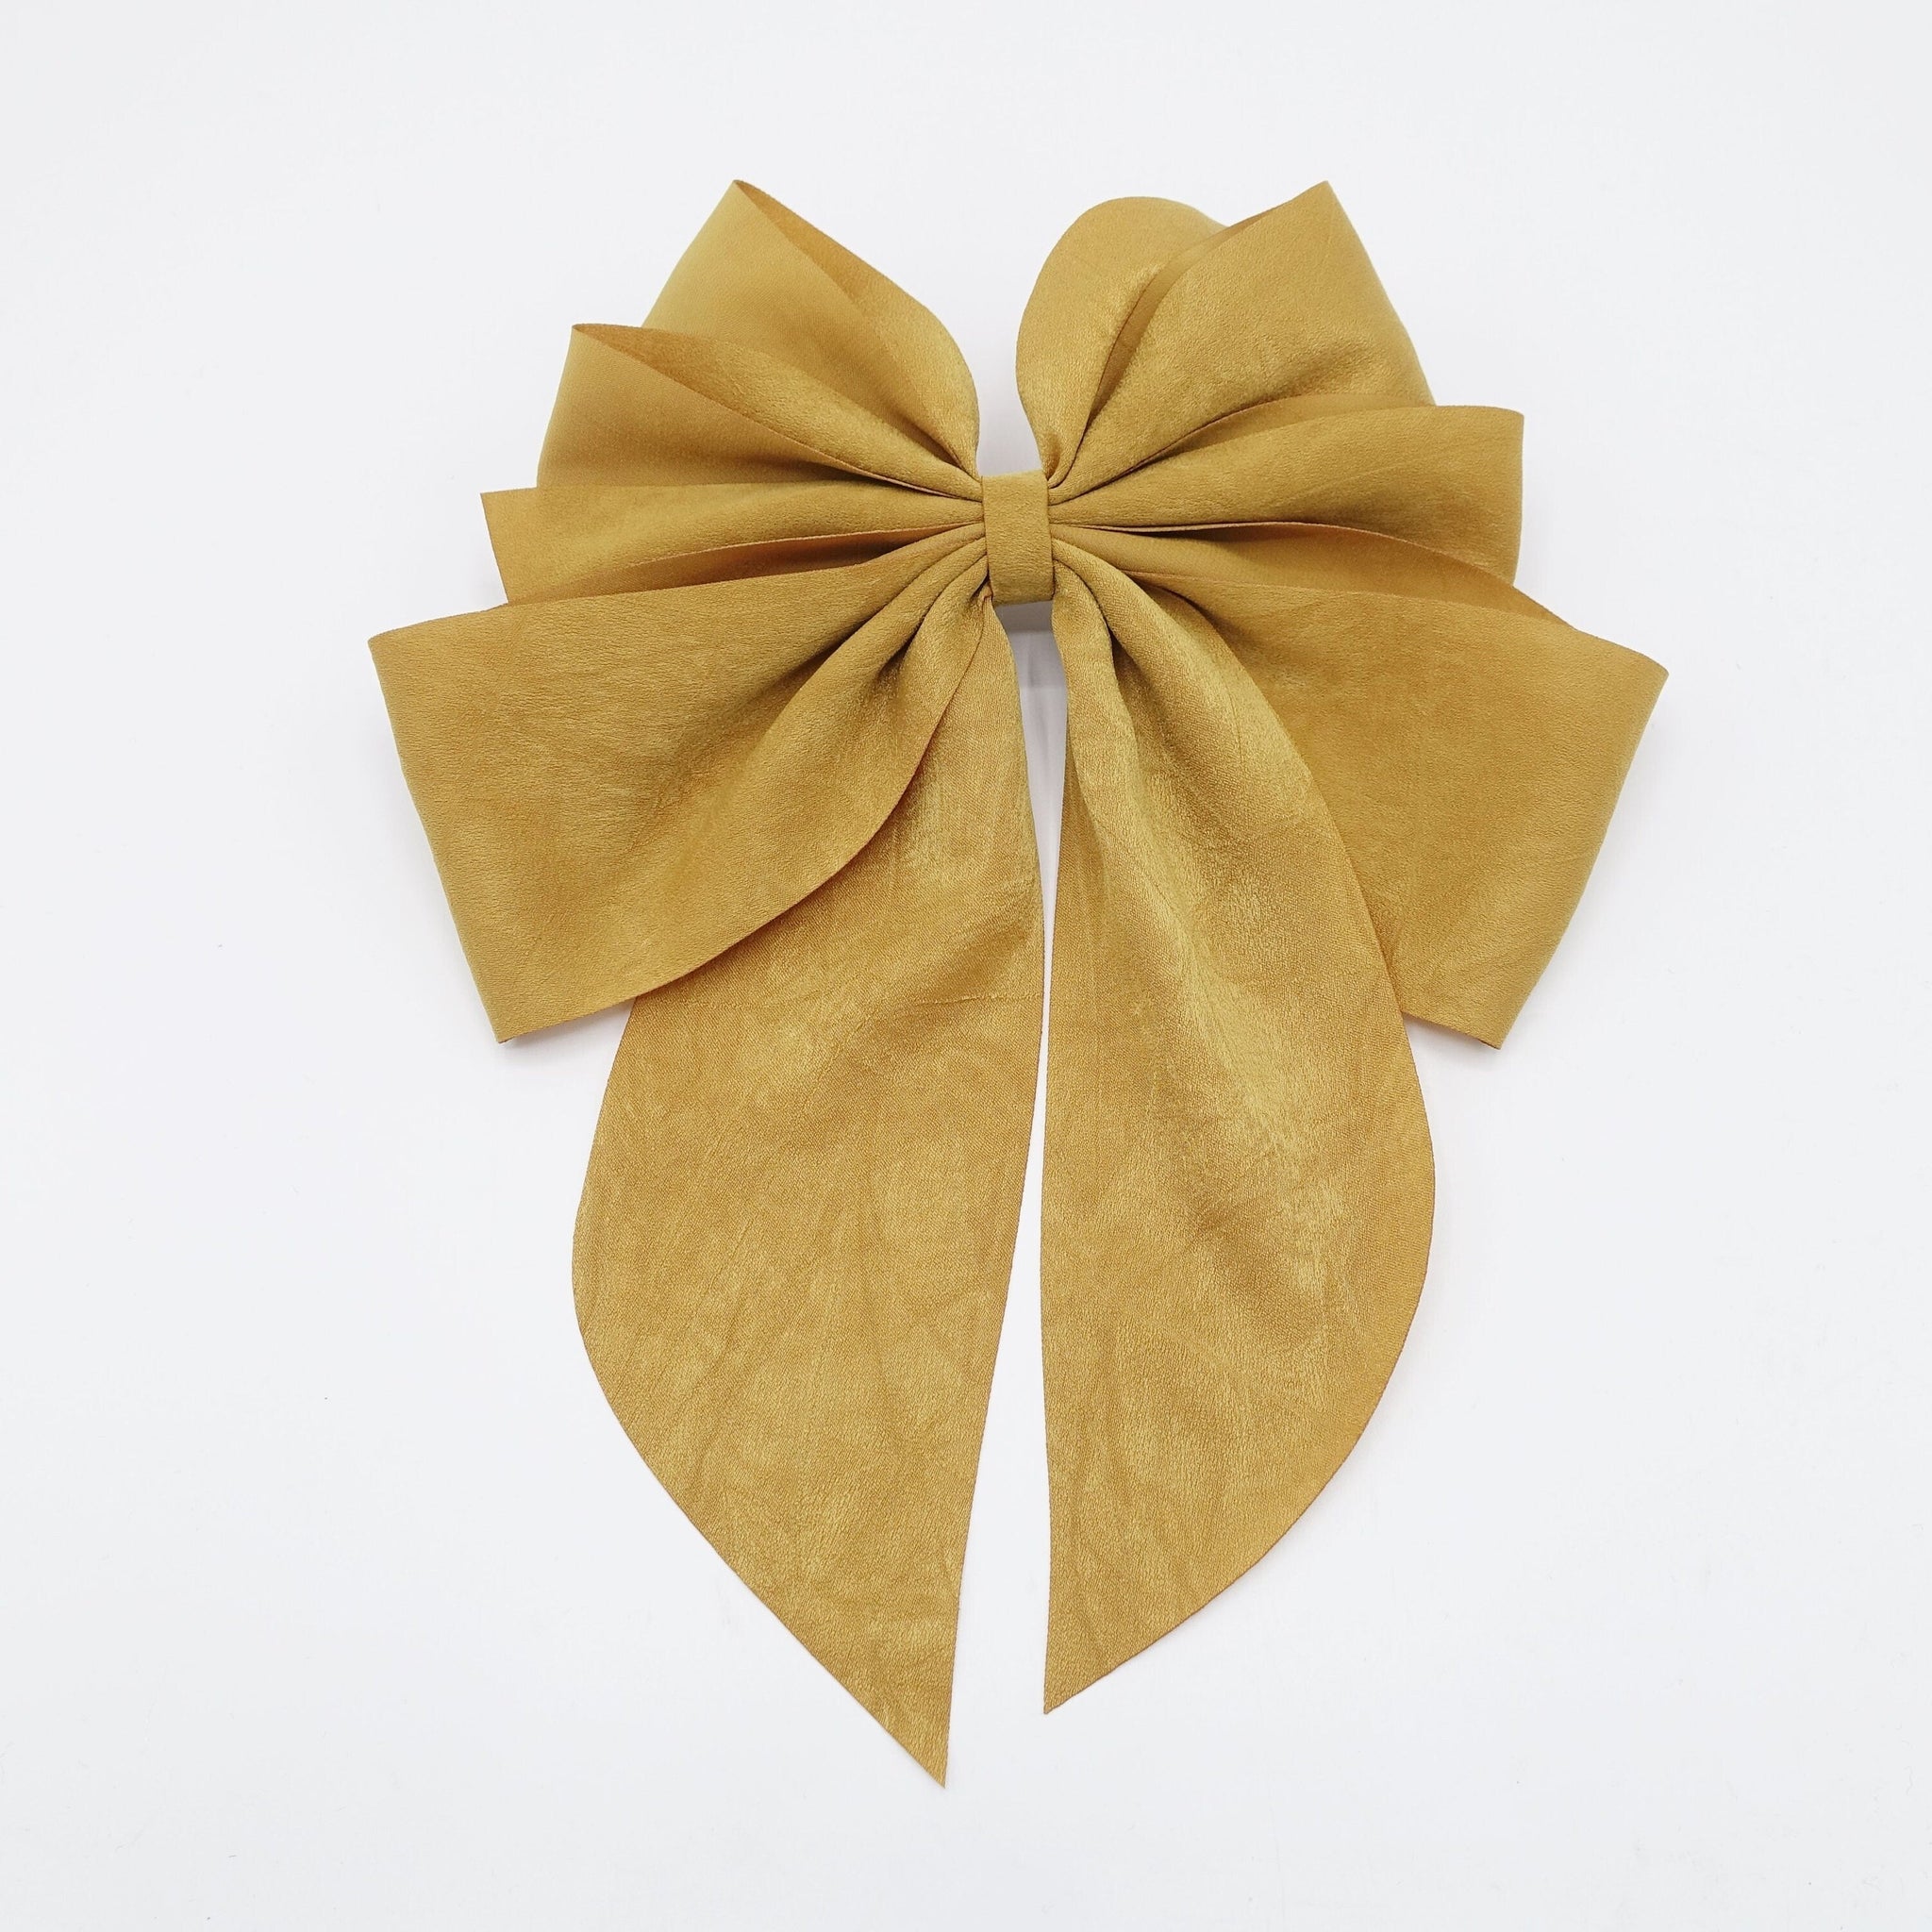 veryshine.com Barrette (Bow) Mustard multiple layered tail hair bow crinkled fabric pleated bow hair accessory for women